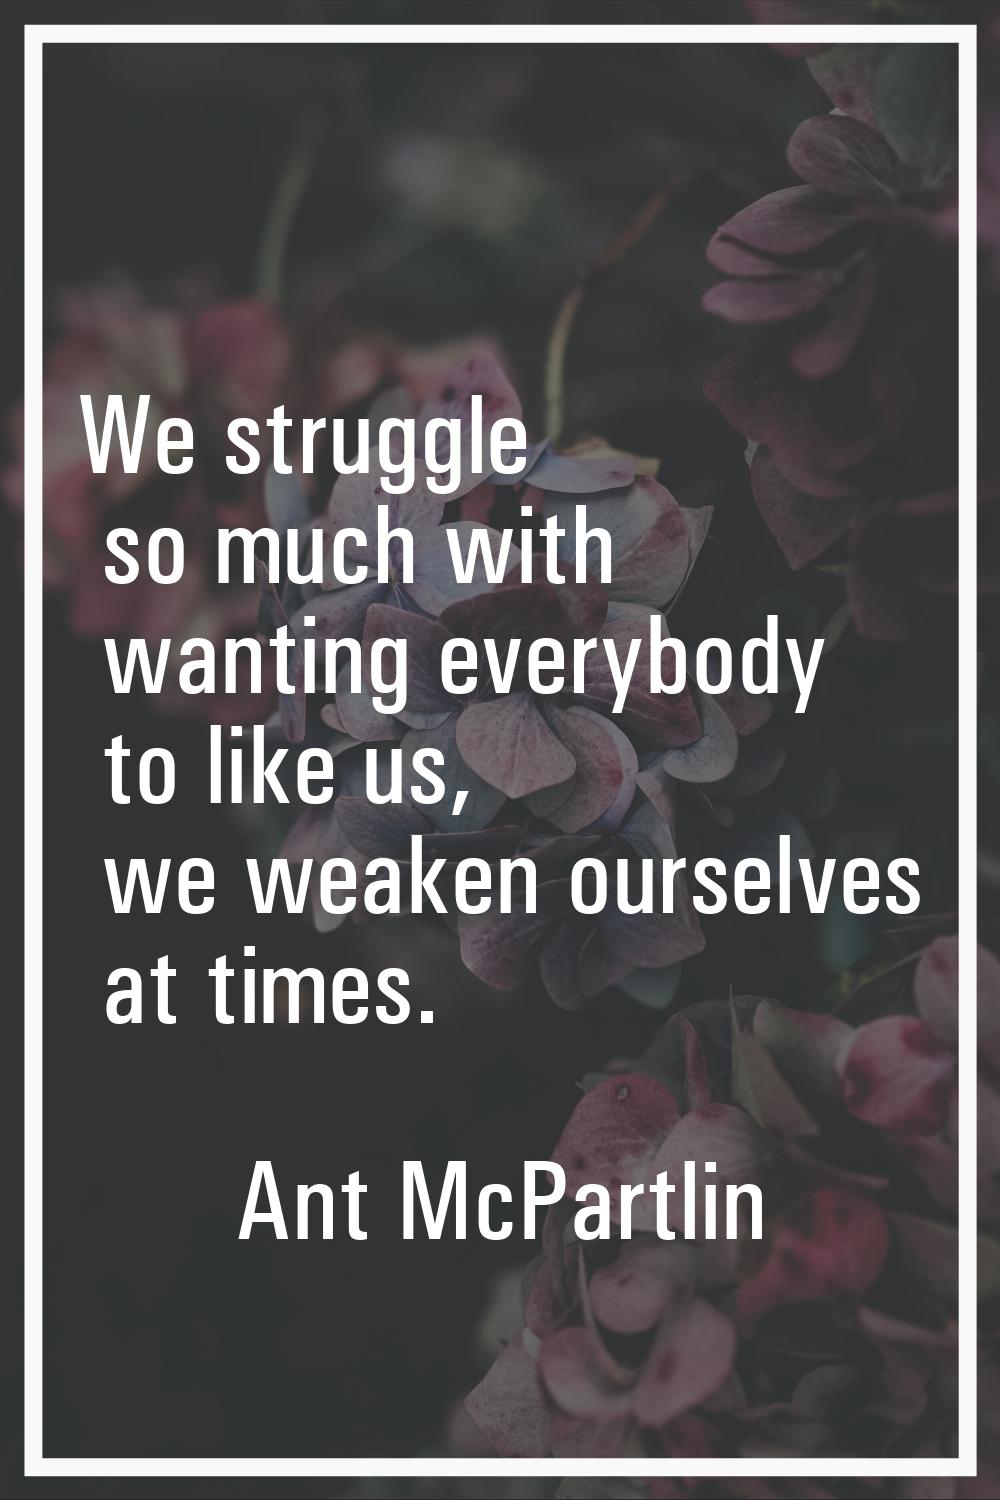 We struggle so much with wanting everybody to like us, we weaken ourselves at times.